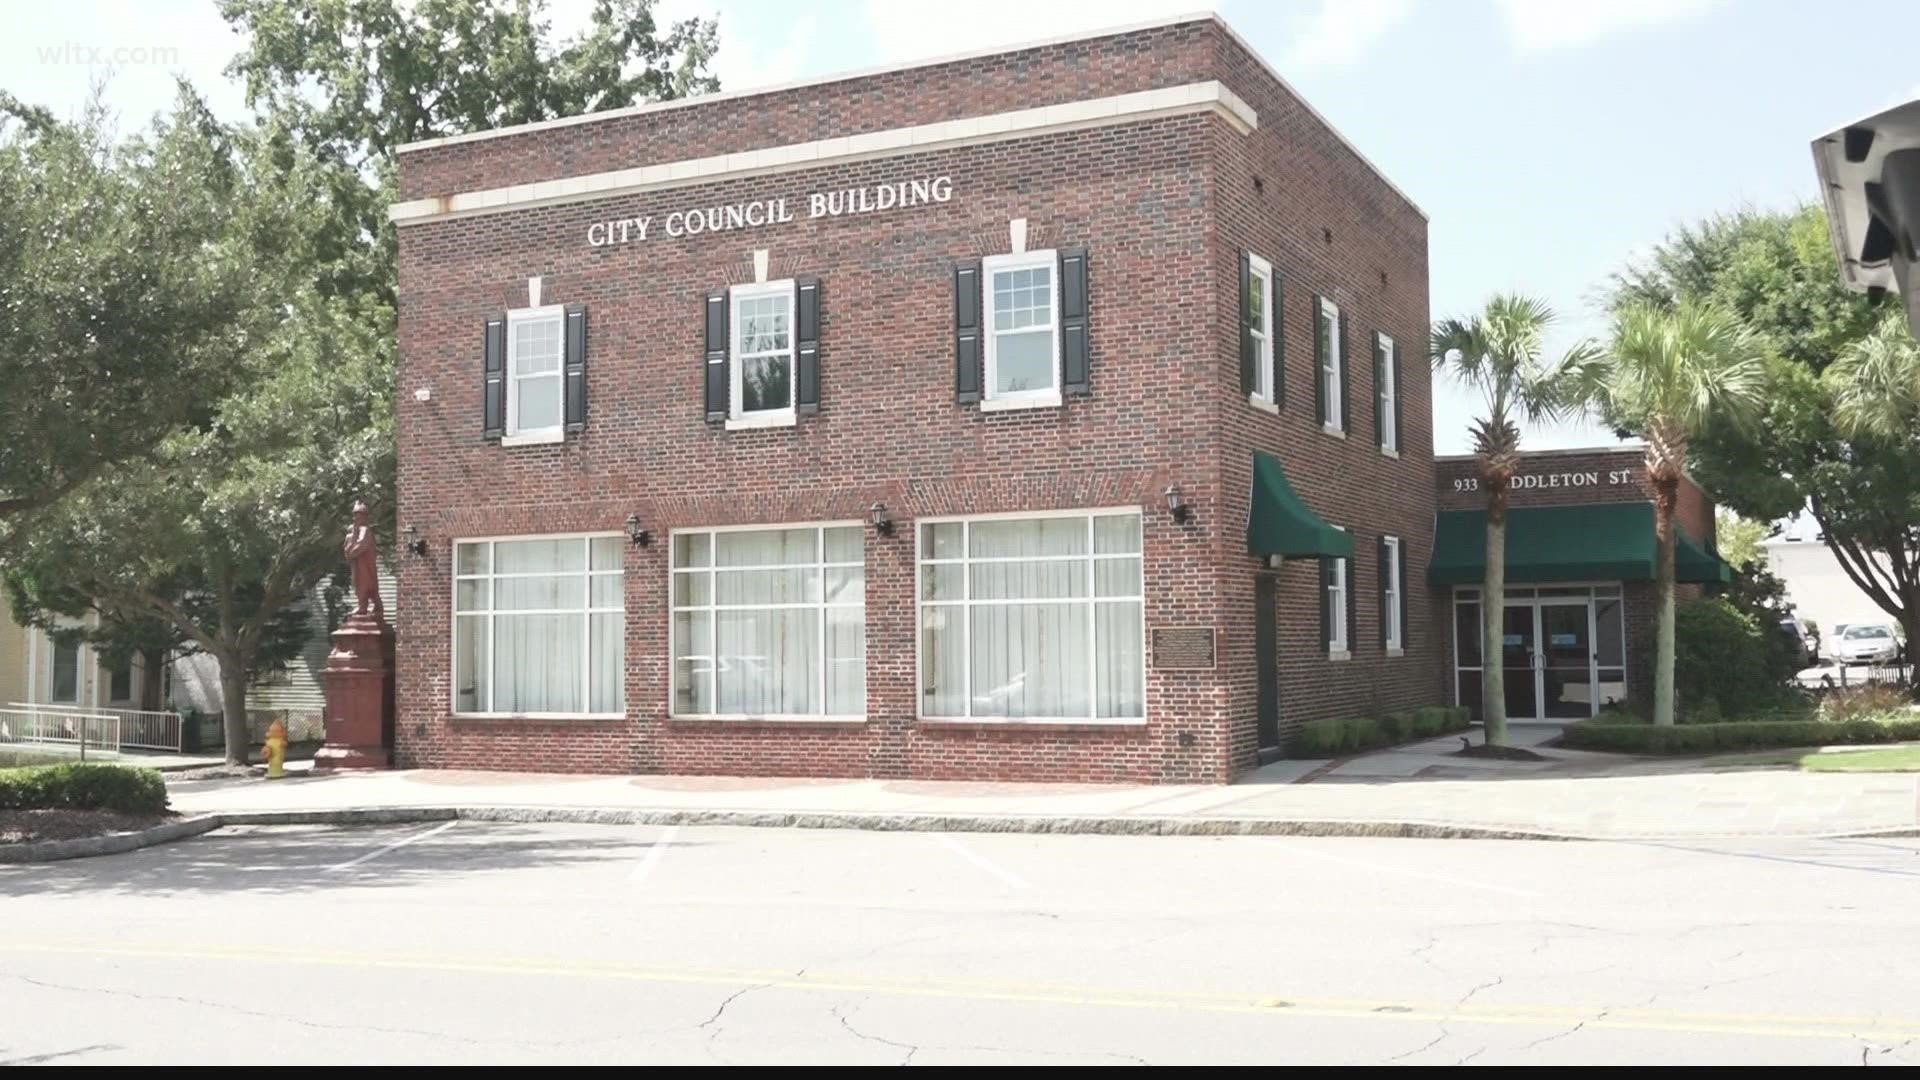 Orangeburg City Council approved a 60 day mask mandate that will require masks in businesses, restaurants, city buildings.